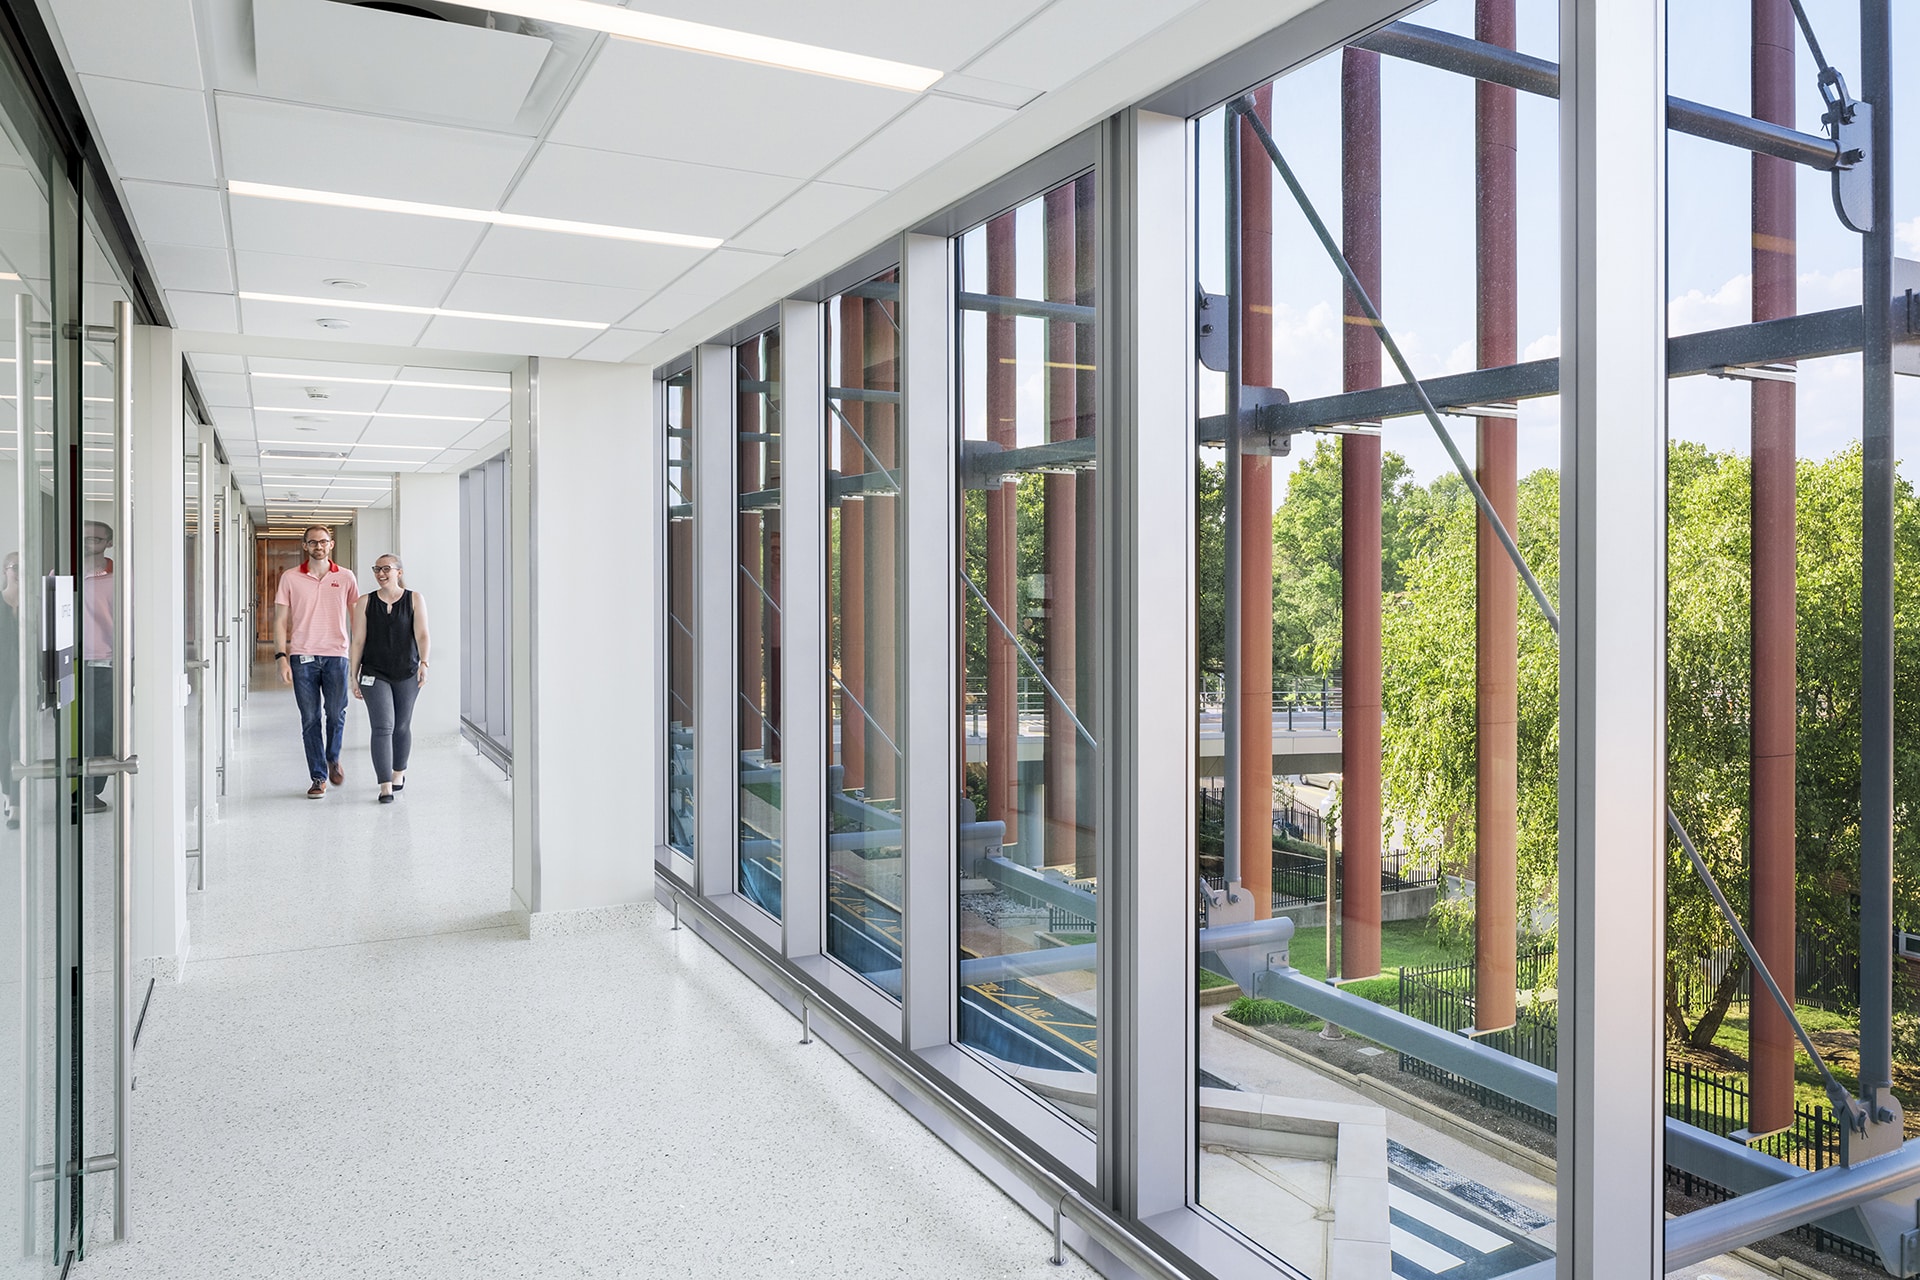 washington university bryan hall corridor designed by trivers architectural firm